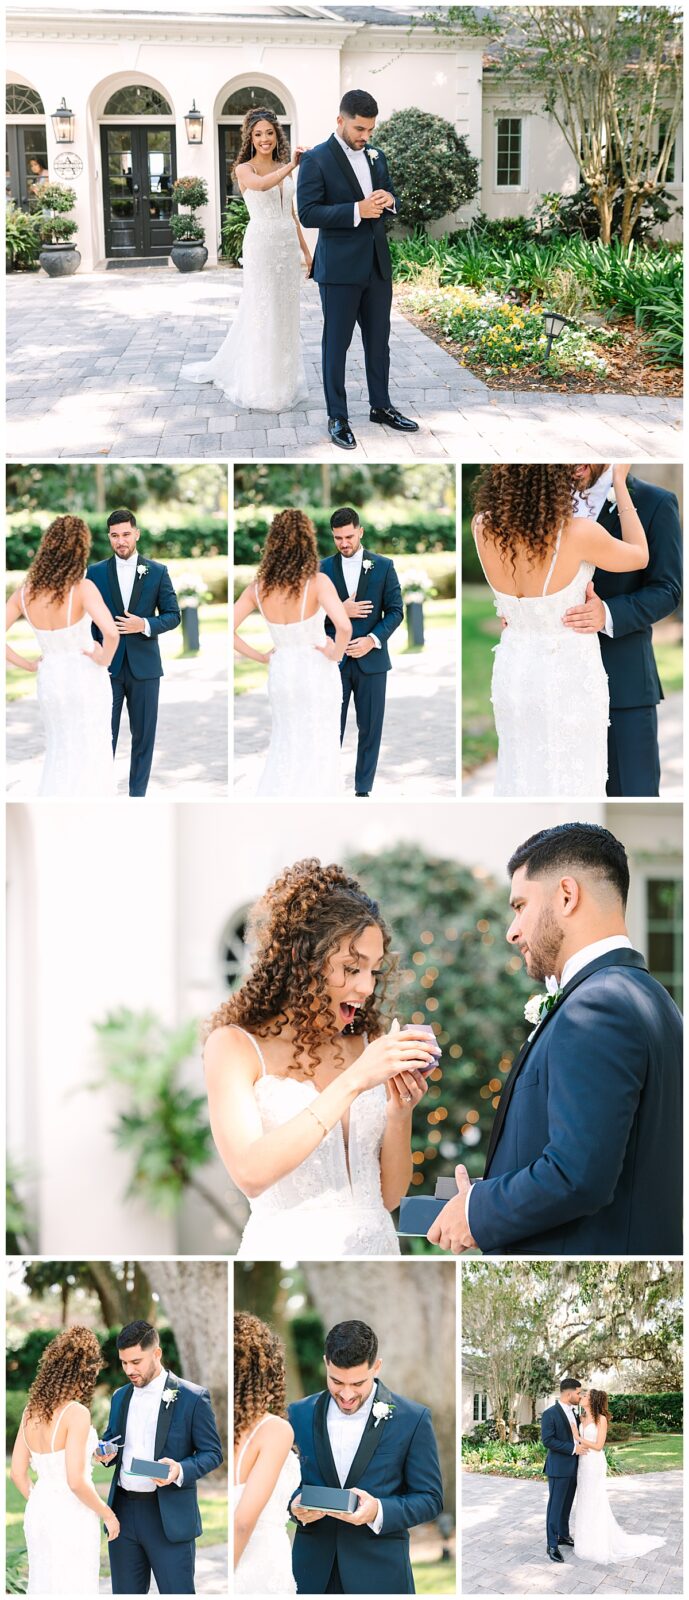 Florida newlyweds wearing a strapless lace gown and a navy blue suit share a first look and exchange gifts before their spring wedding at Azaleana Manor.